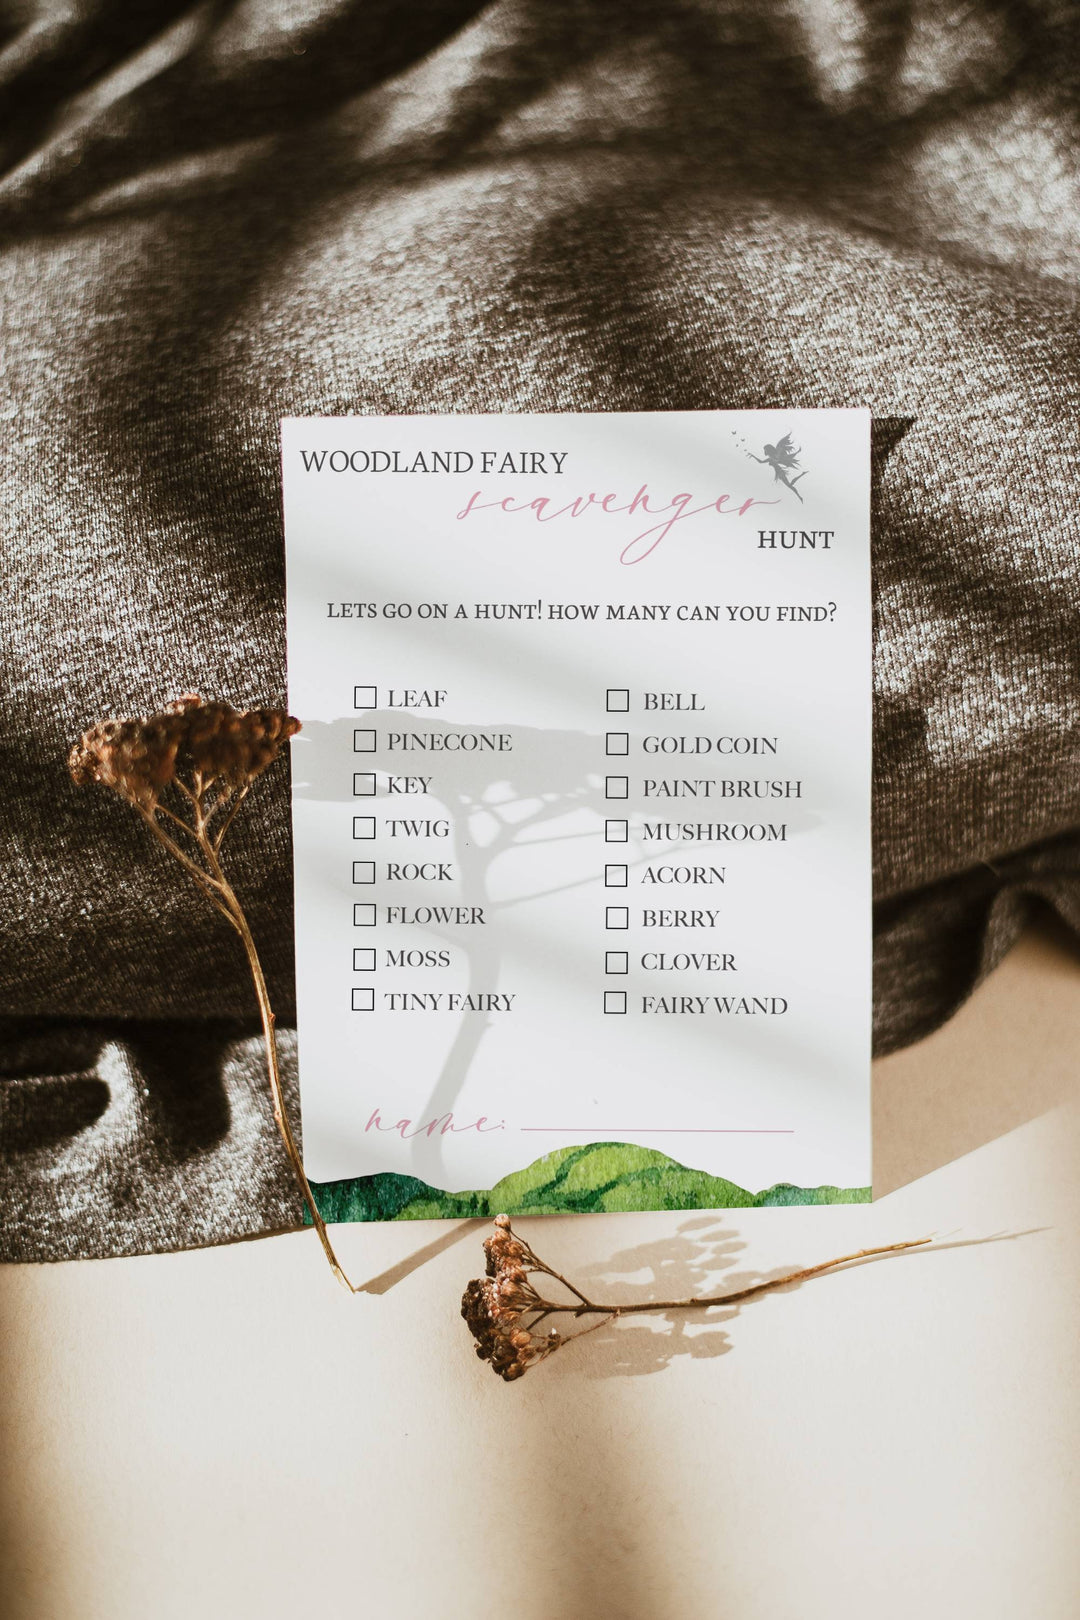 Signs and Games for Enchanted Forest First Birthday - Enchanted Forest Birthday Party Game - What's Your Fairy Name Game - Garden Party DIY